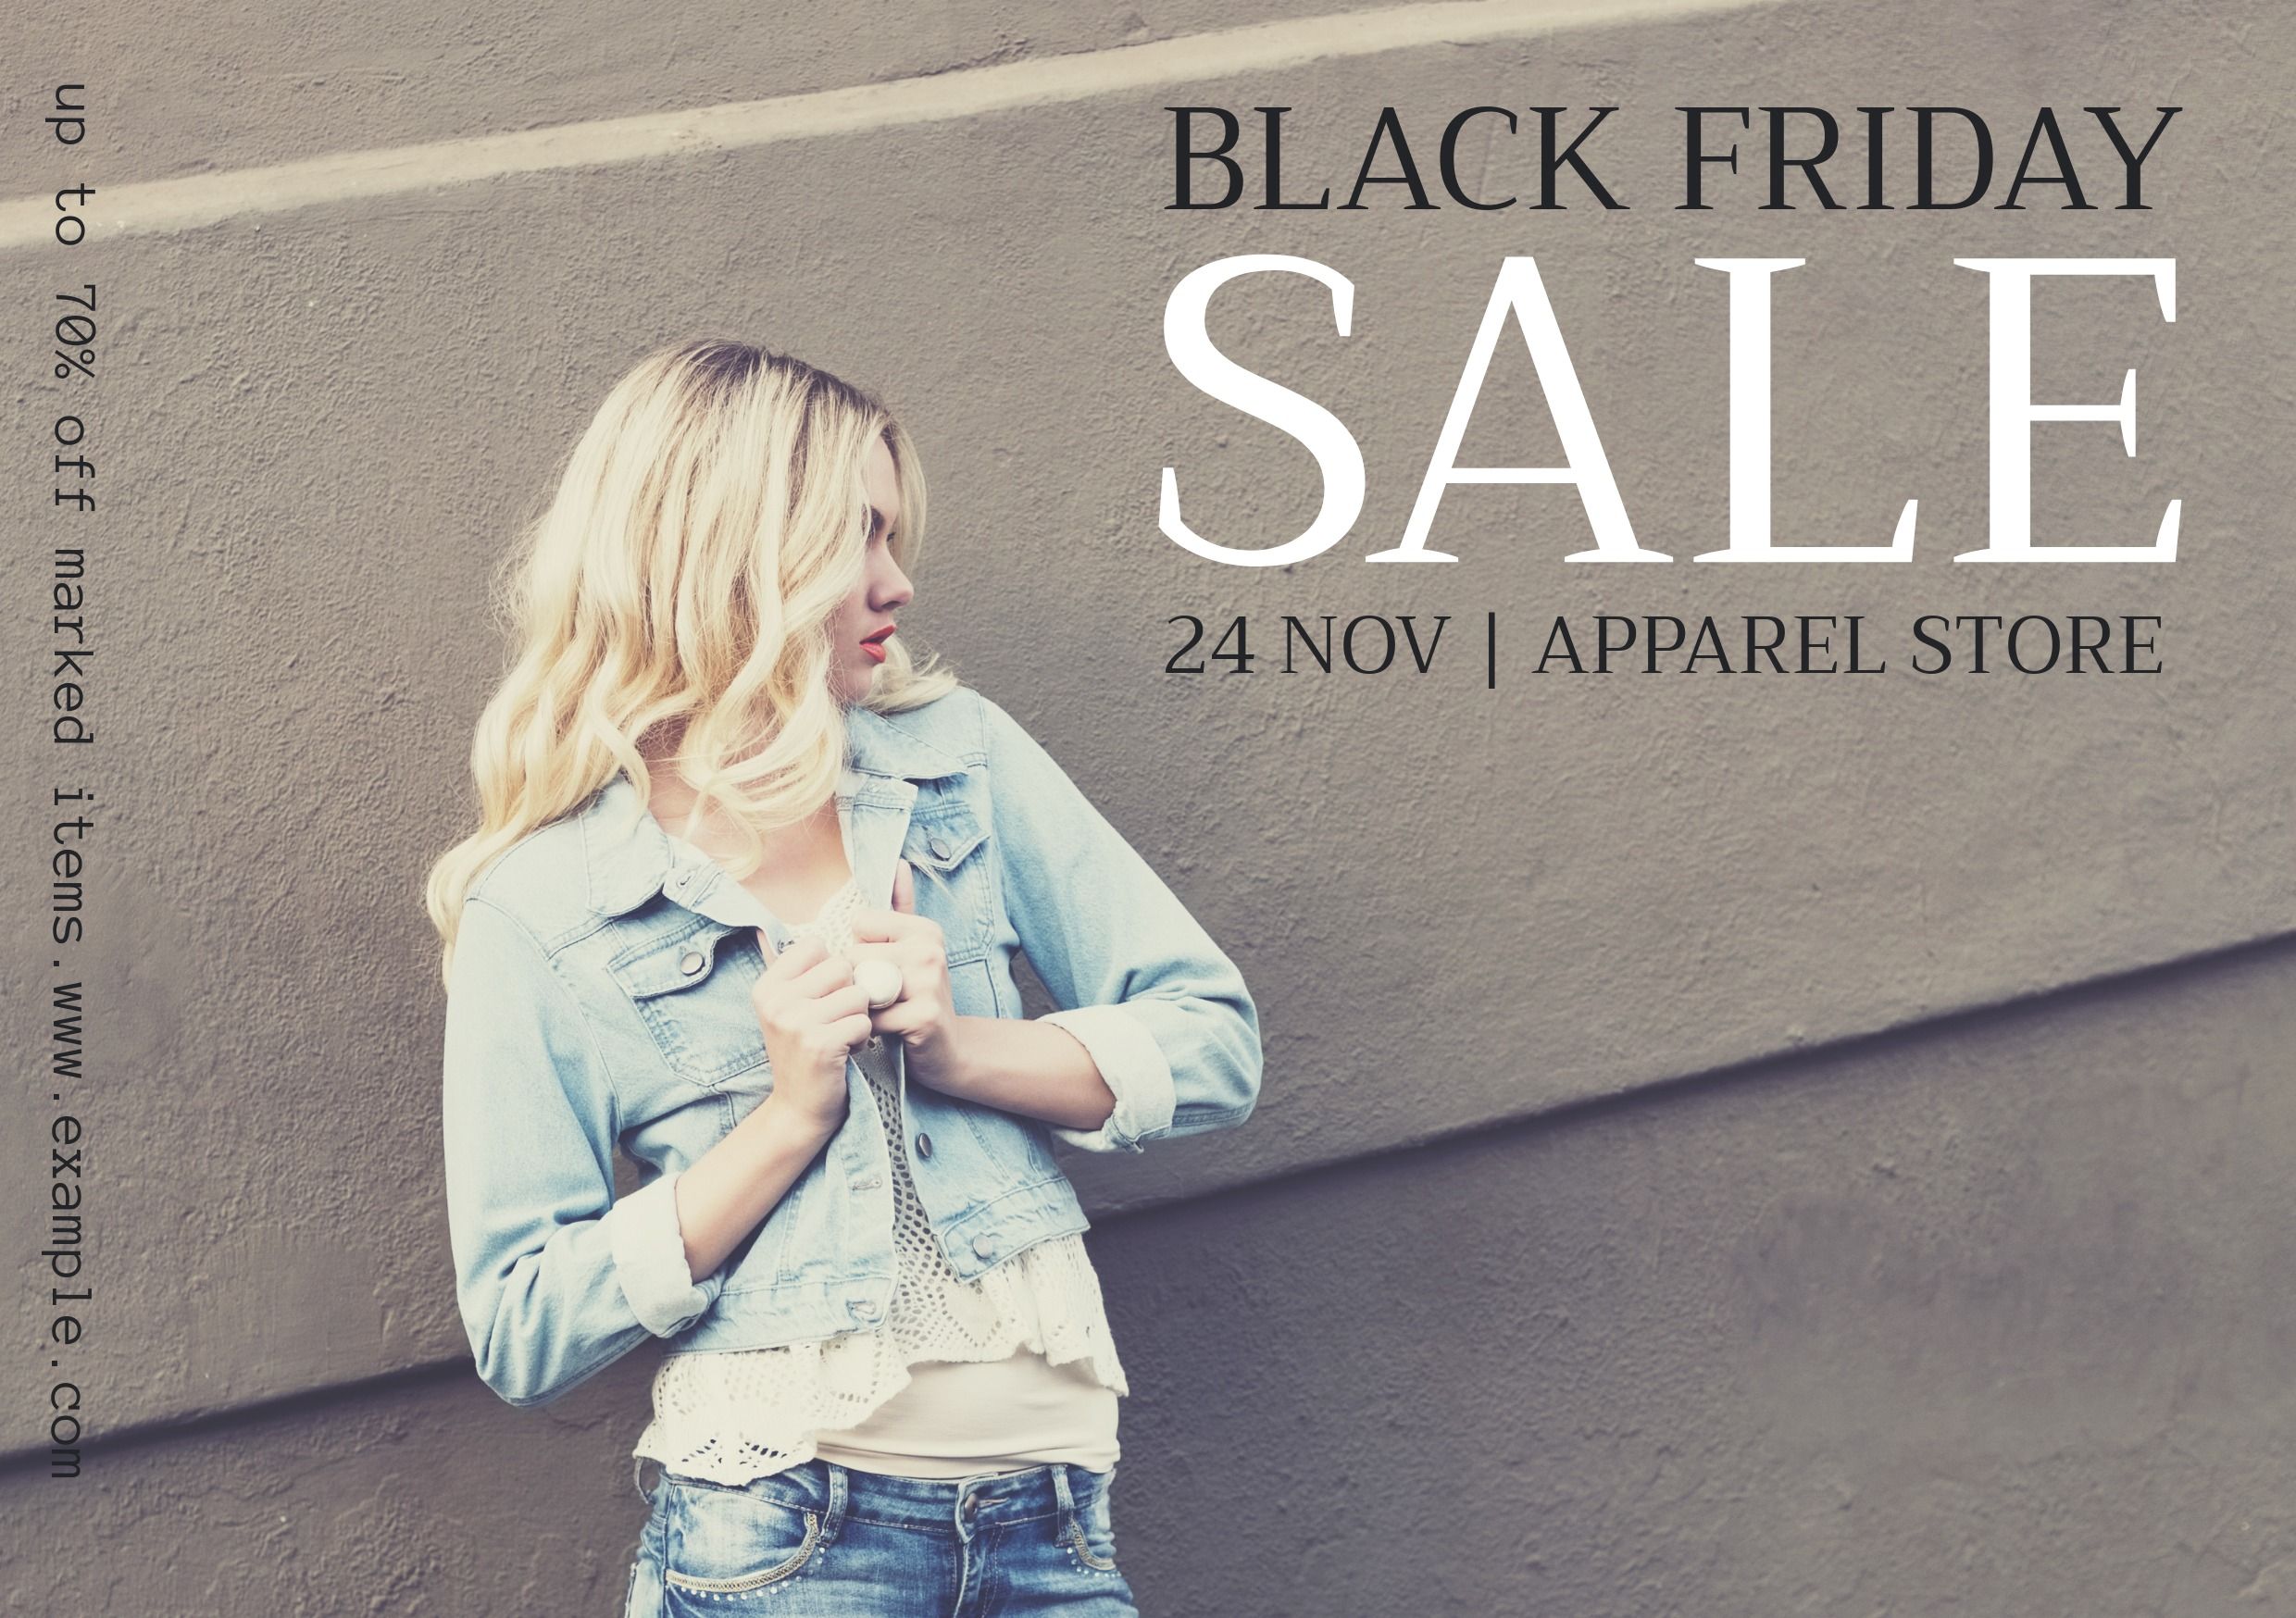 Blonde woman Black Friday sale - 50 ideas and templates to use in your designs - Image